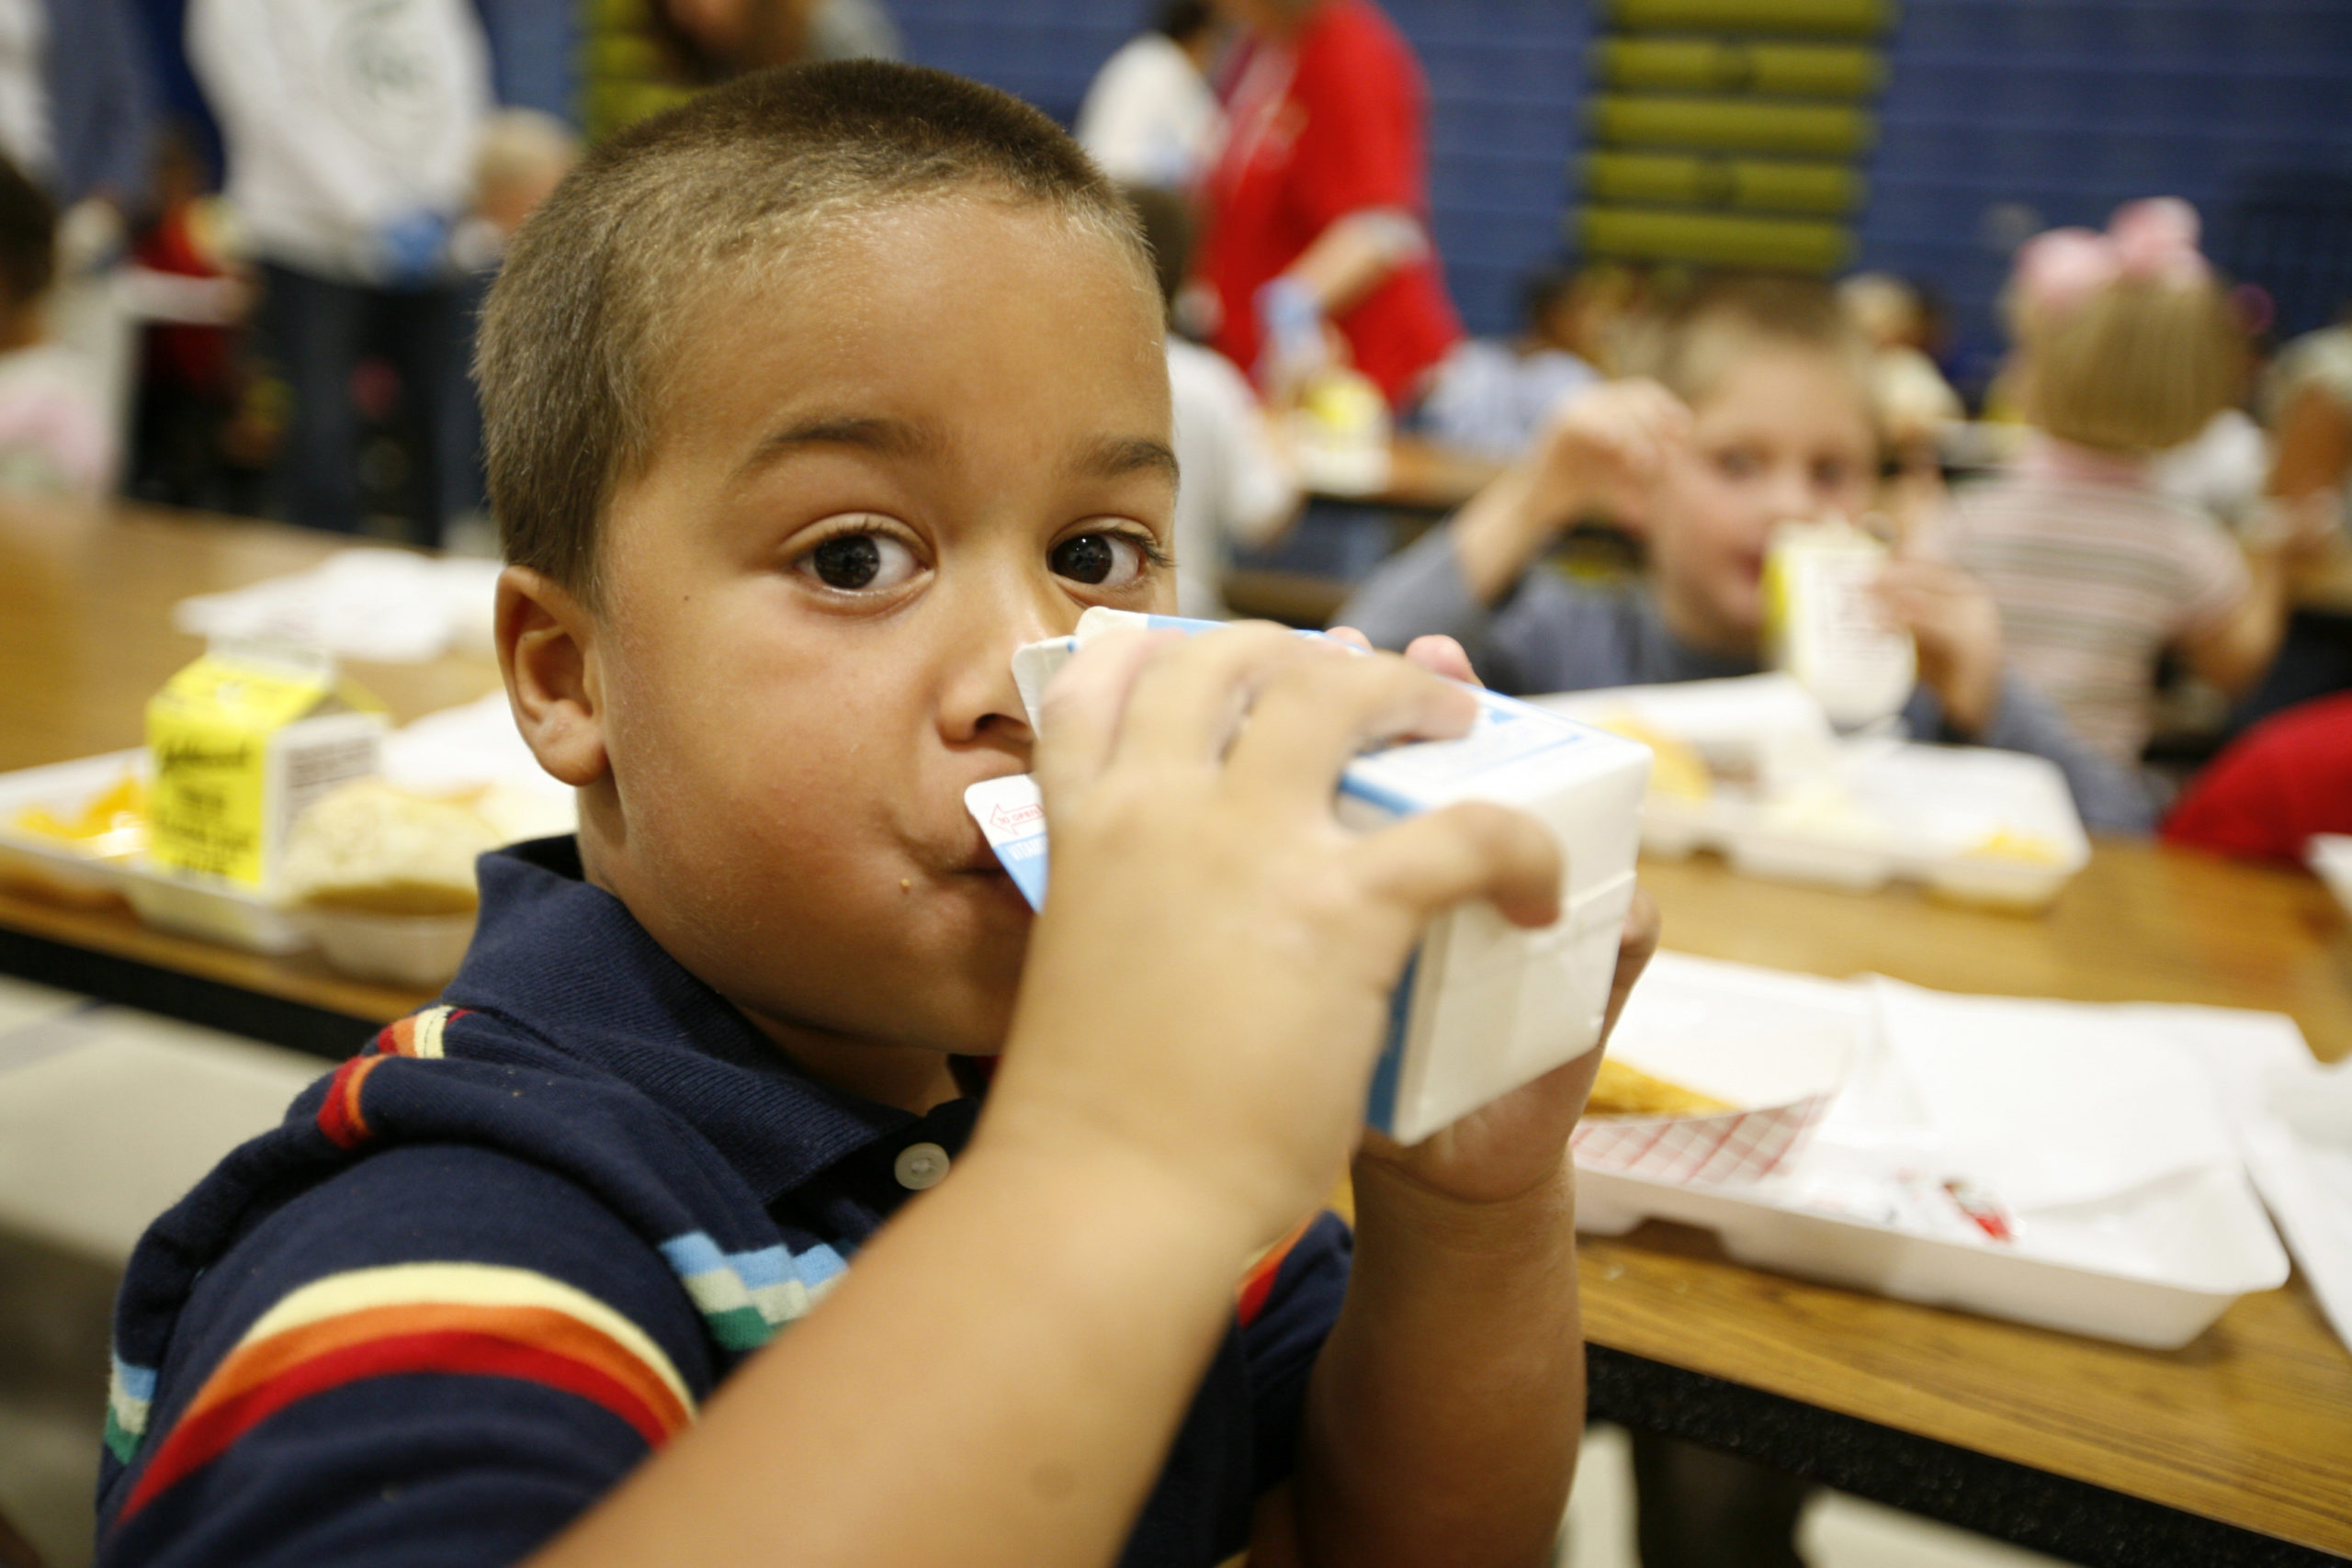 Picture of a young boy in a cafeteria drinking a carton of milk.